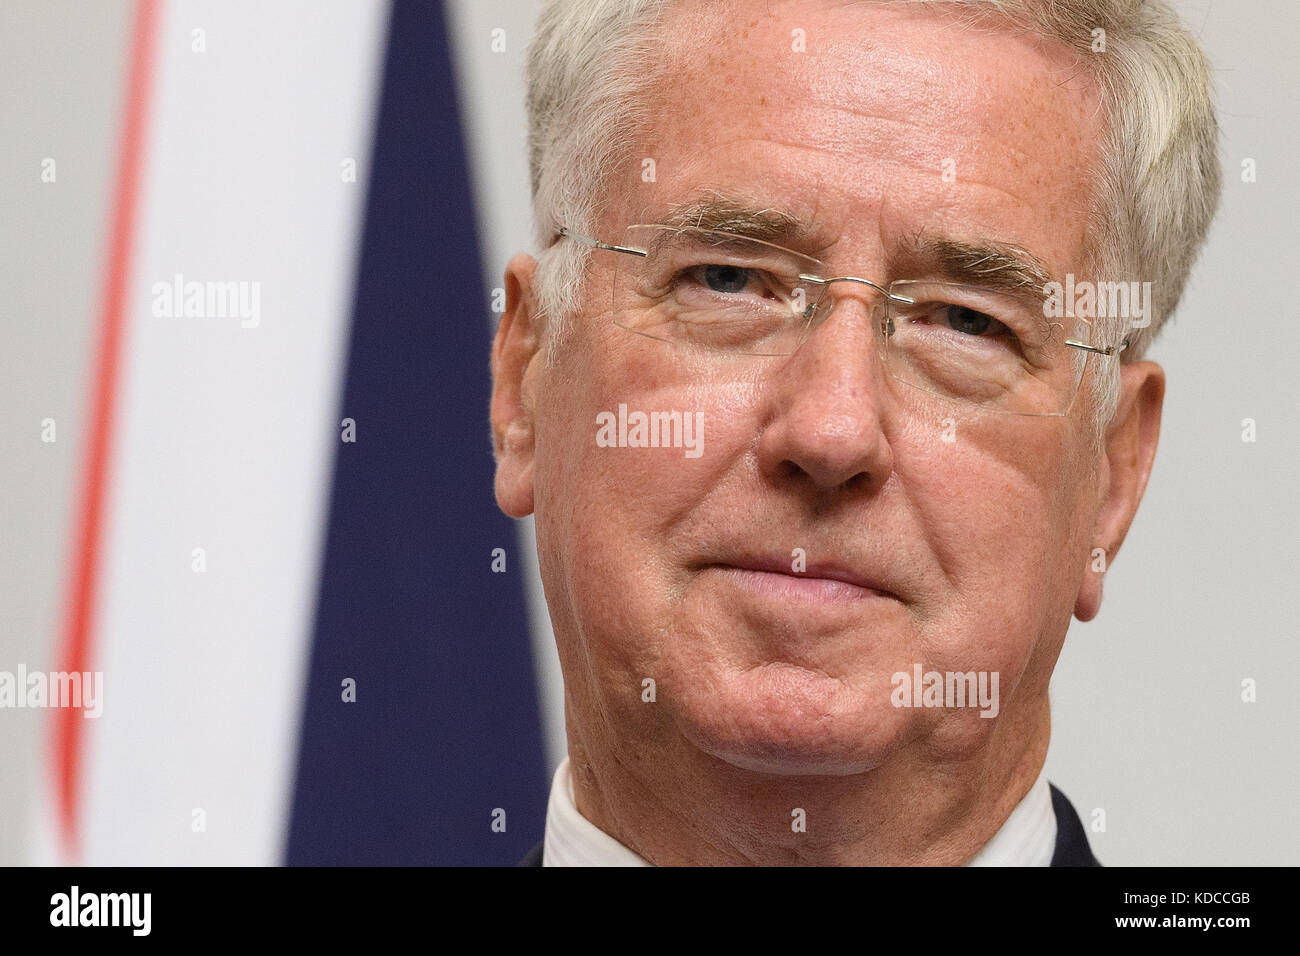 Defence Secretary Sir Michael Fallon speaks during a joint press conference with Foreign Secretary Boris Johnson, Poland's Foreign Minister Witold Waszczykowksi and Polish Defence Minister Antoni Macierewicz, at the Foreign & Commonwealth Office in London. Stock Photo